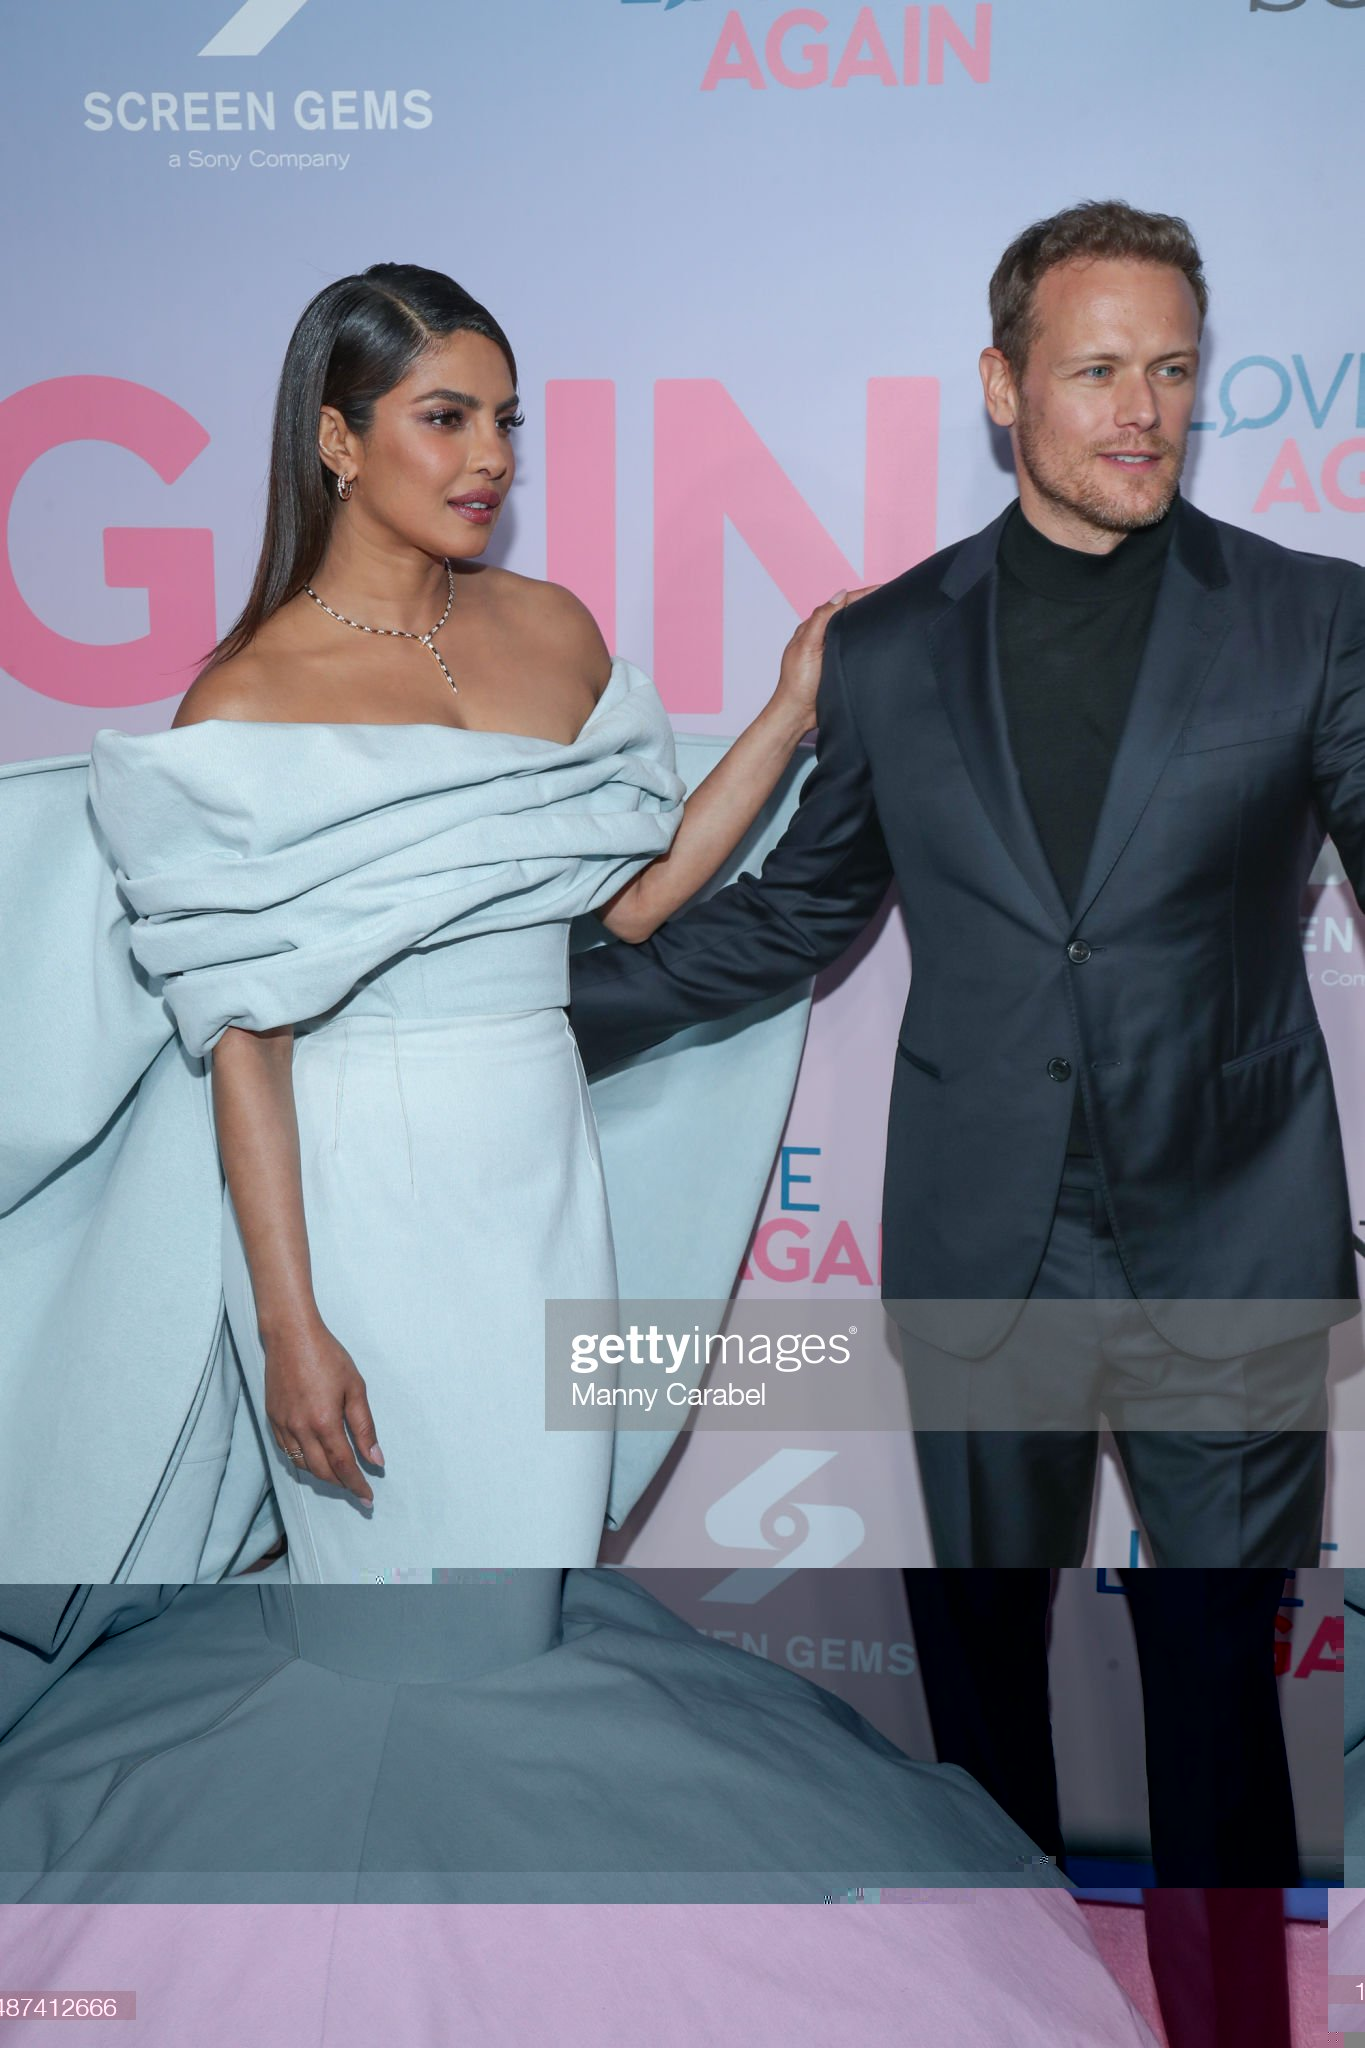 gettyimages-1487412666-2048x2048.jpg